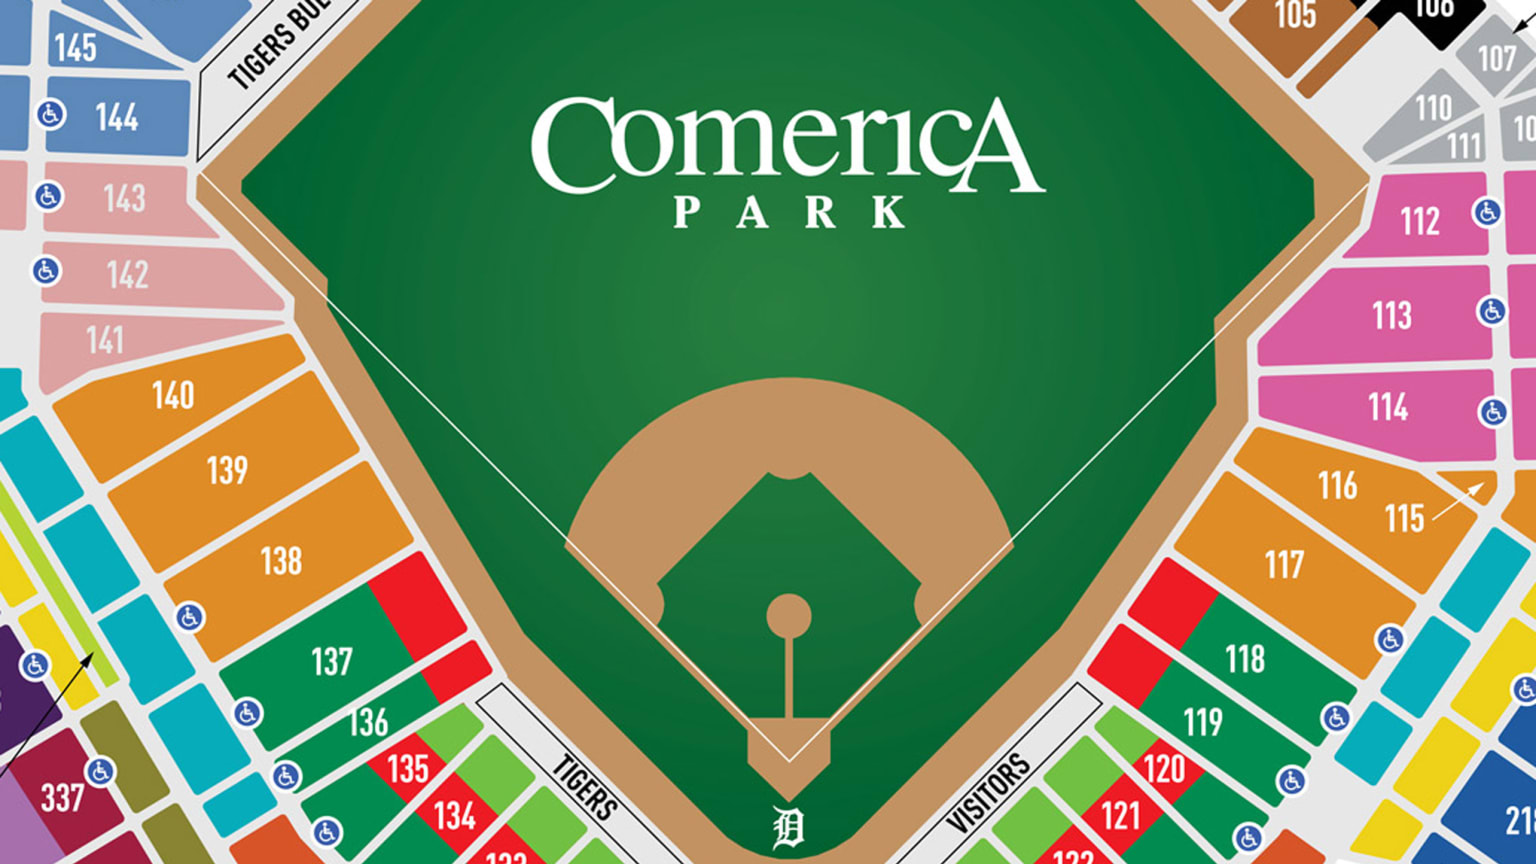 Comerica Park Seating Chart Rows Concert Two Birds Home